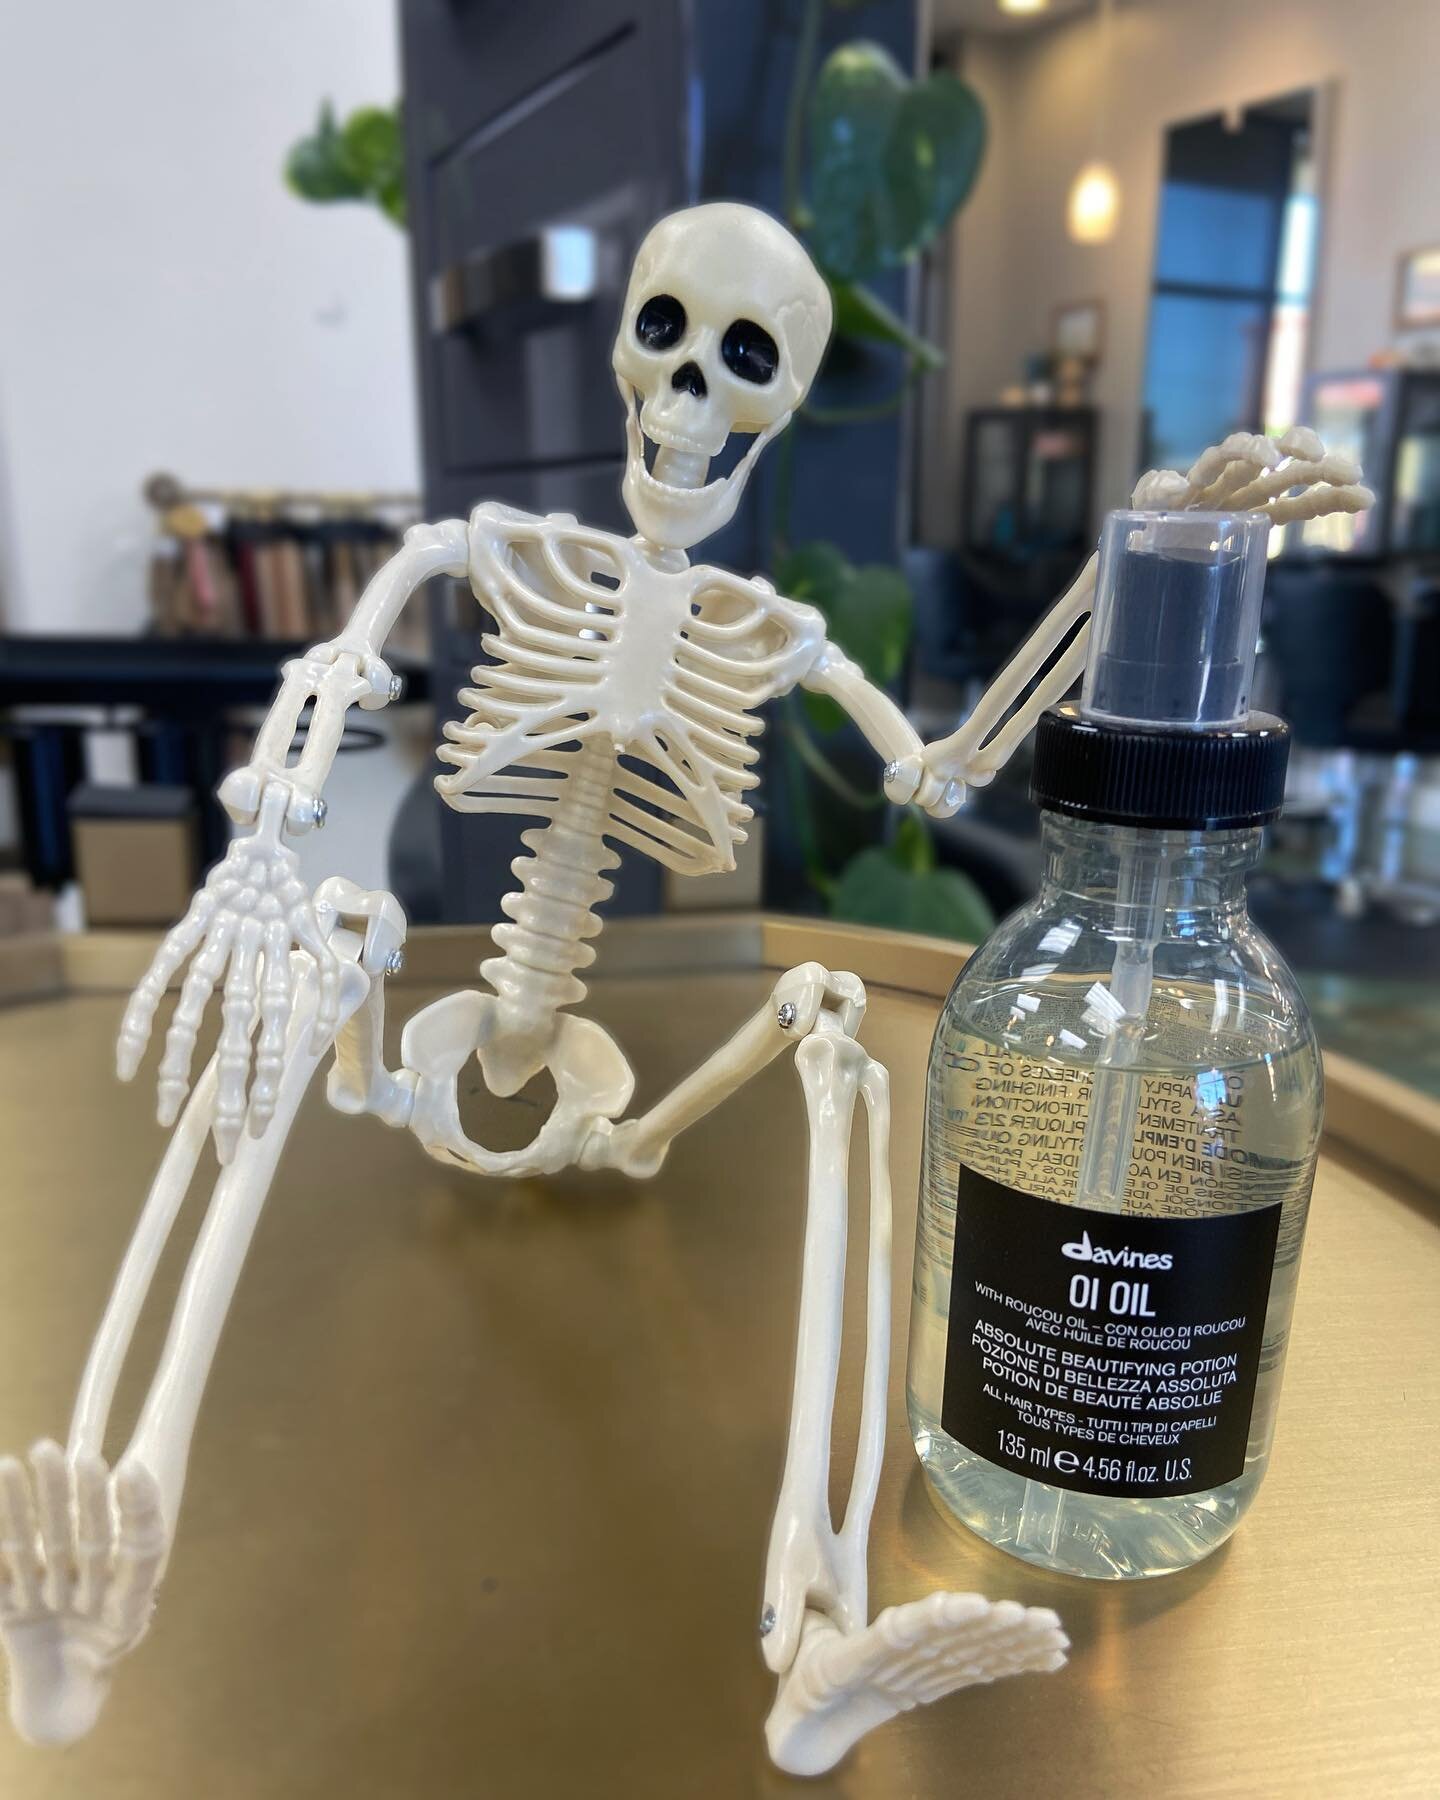 No Tricks✖️, Only Treats! 🍬🎃
Stylist Product Pick Of The Week! 
@blwhite favorite oil for ALL HAIR TYPES is 
@davinesofficial OI OIL ⚡️
Why he loves it: 

- Smells great 
- Adds Shine 
- Not greasy or heavy on hair 

#riversidesalon #riversidehairs